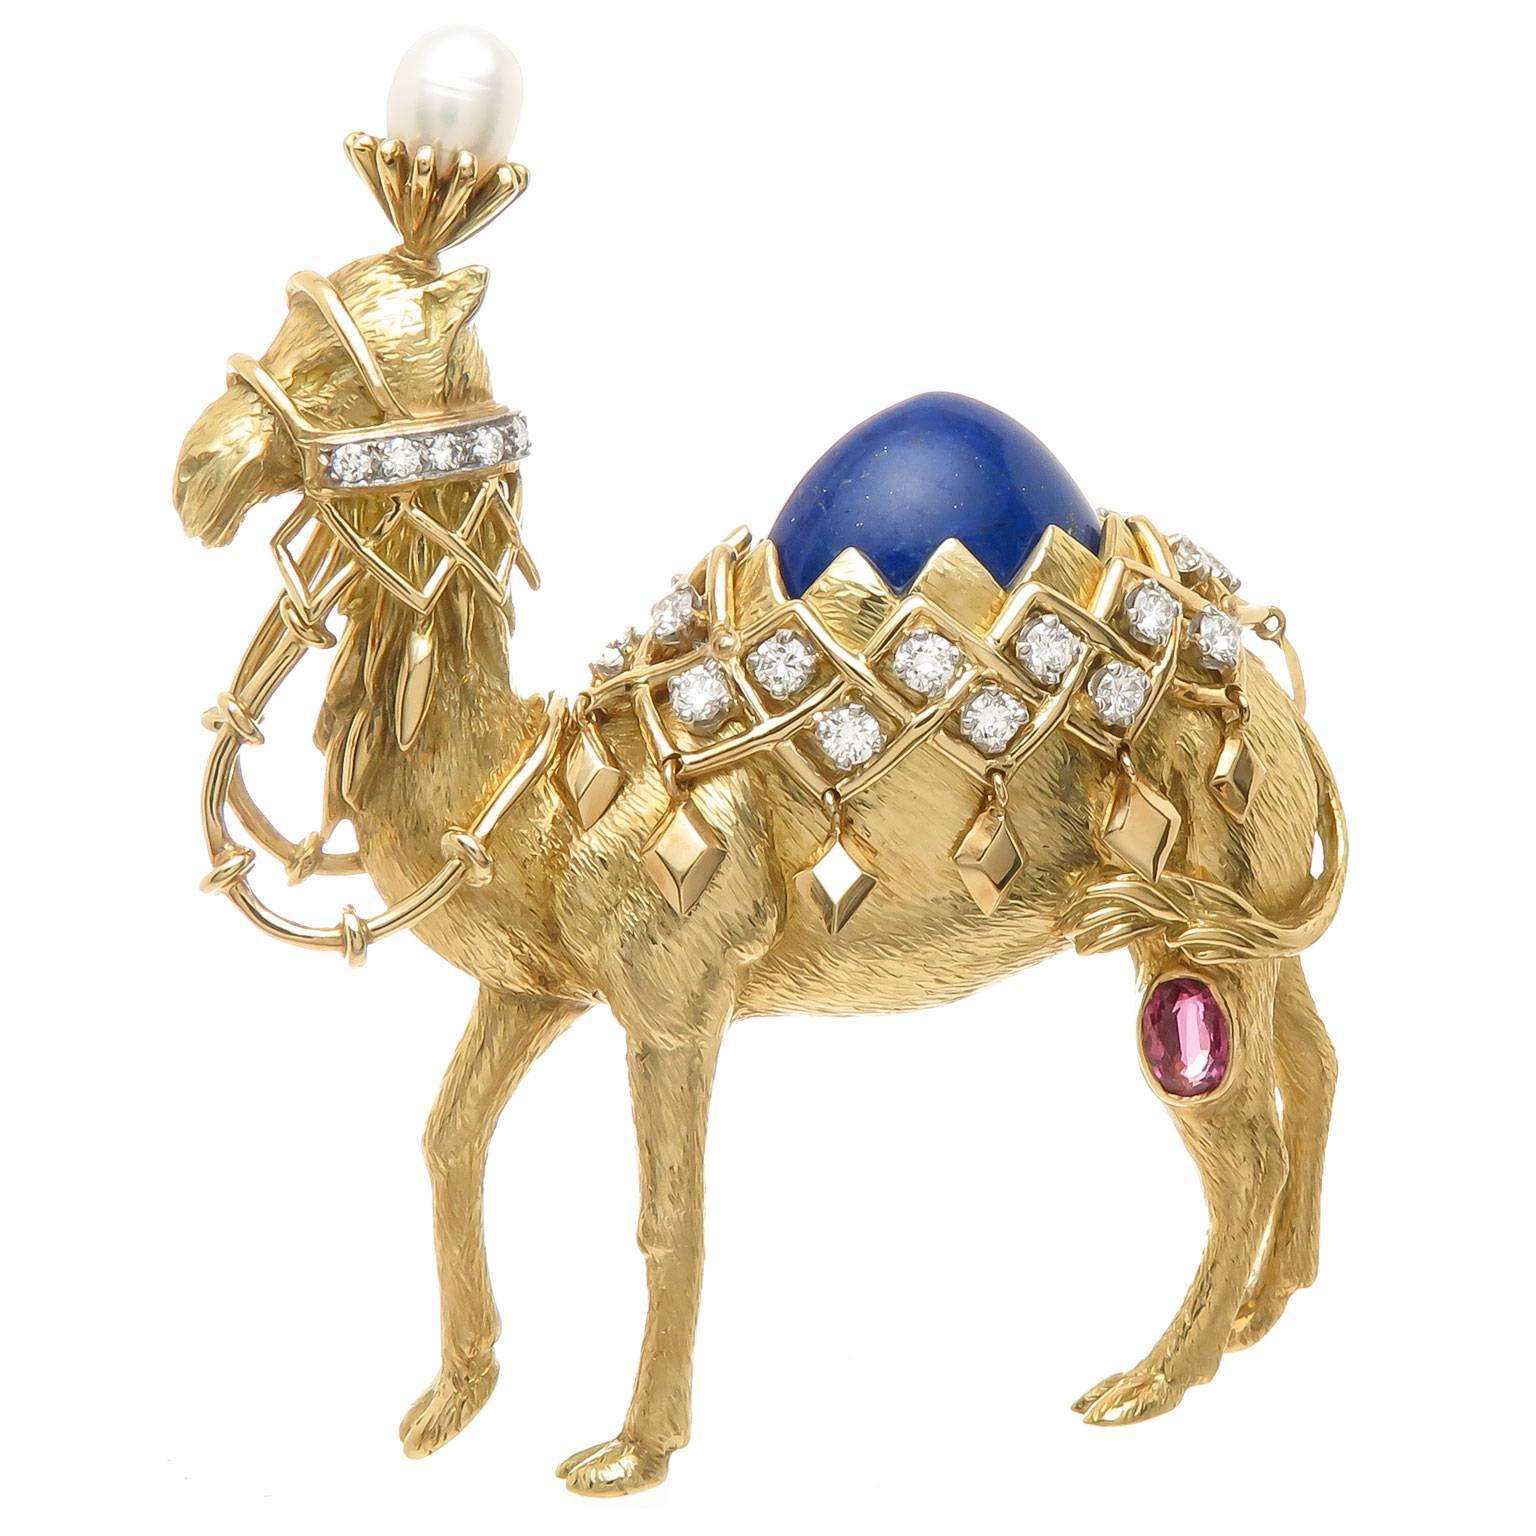 Jean Schlumberger for Tiffany & Co. Large Camel Brooch